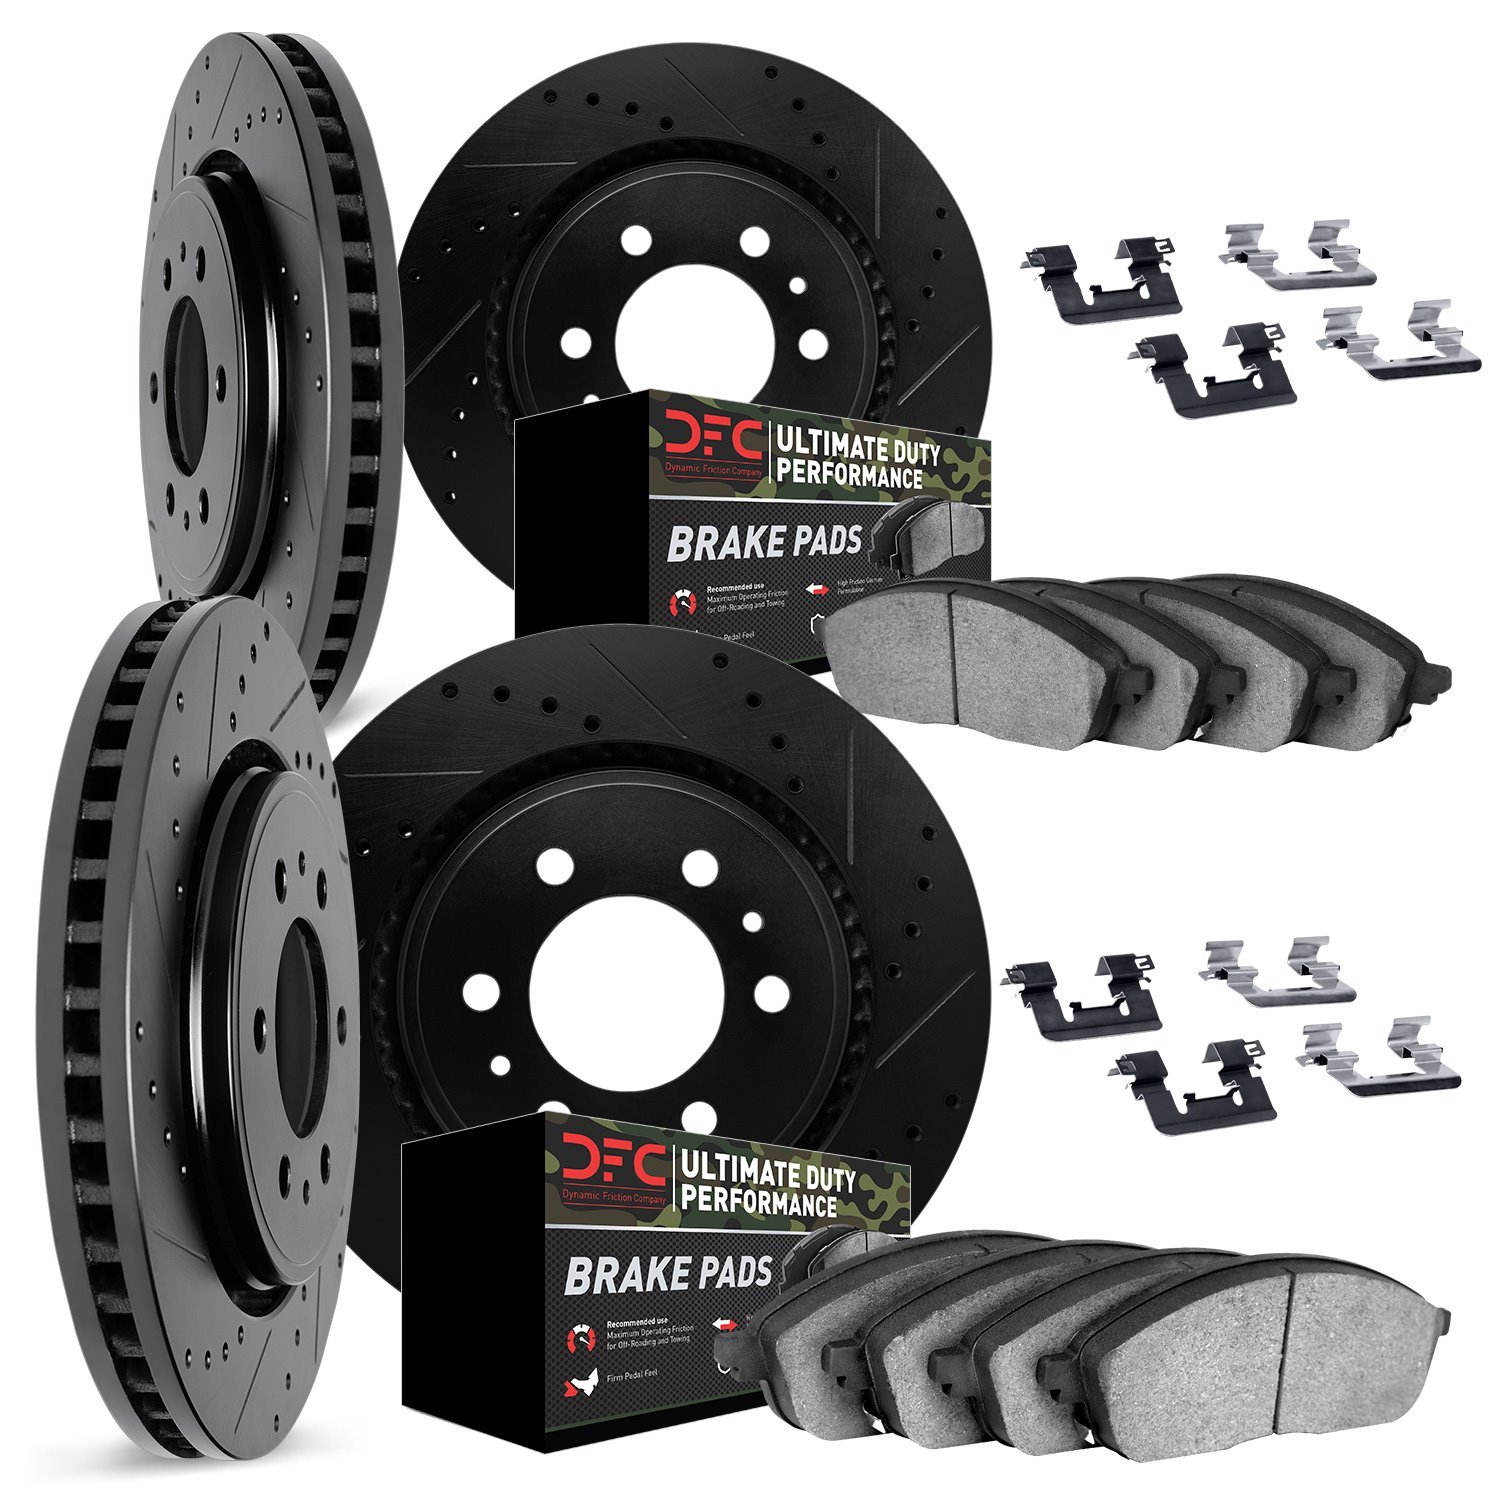 8414-67007 Drilled/Slotted Brake Rotors with Ultimate-Duty Brake Pads Kit & Hardware [Black], Fits Select Infiniti/Nissan, Posit